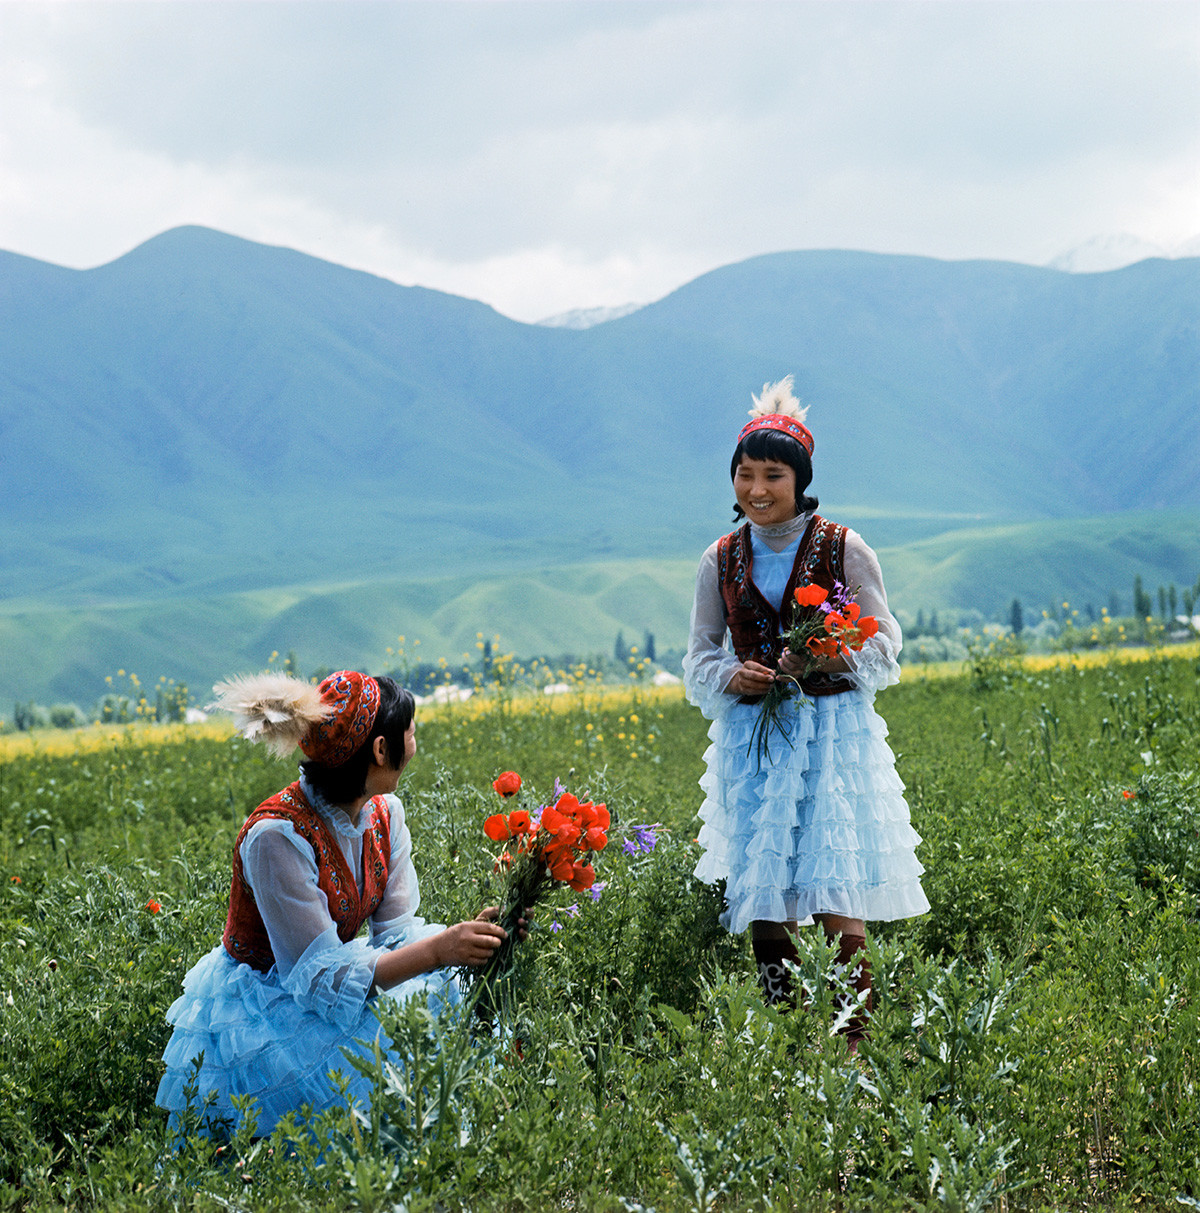 Kirghiz girls in traditional dresses